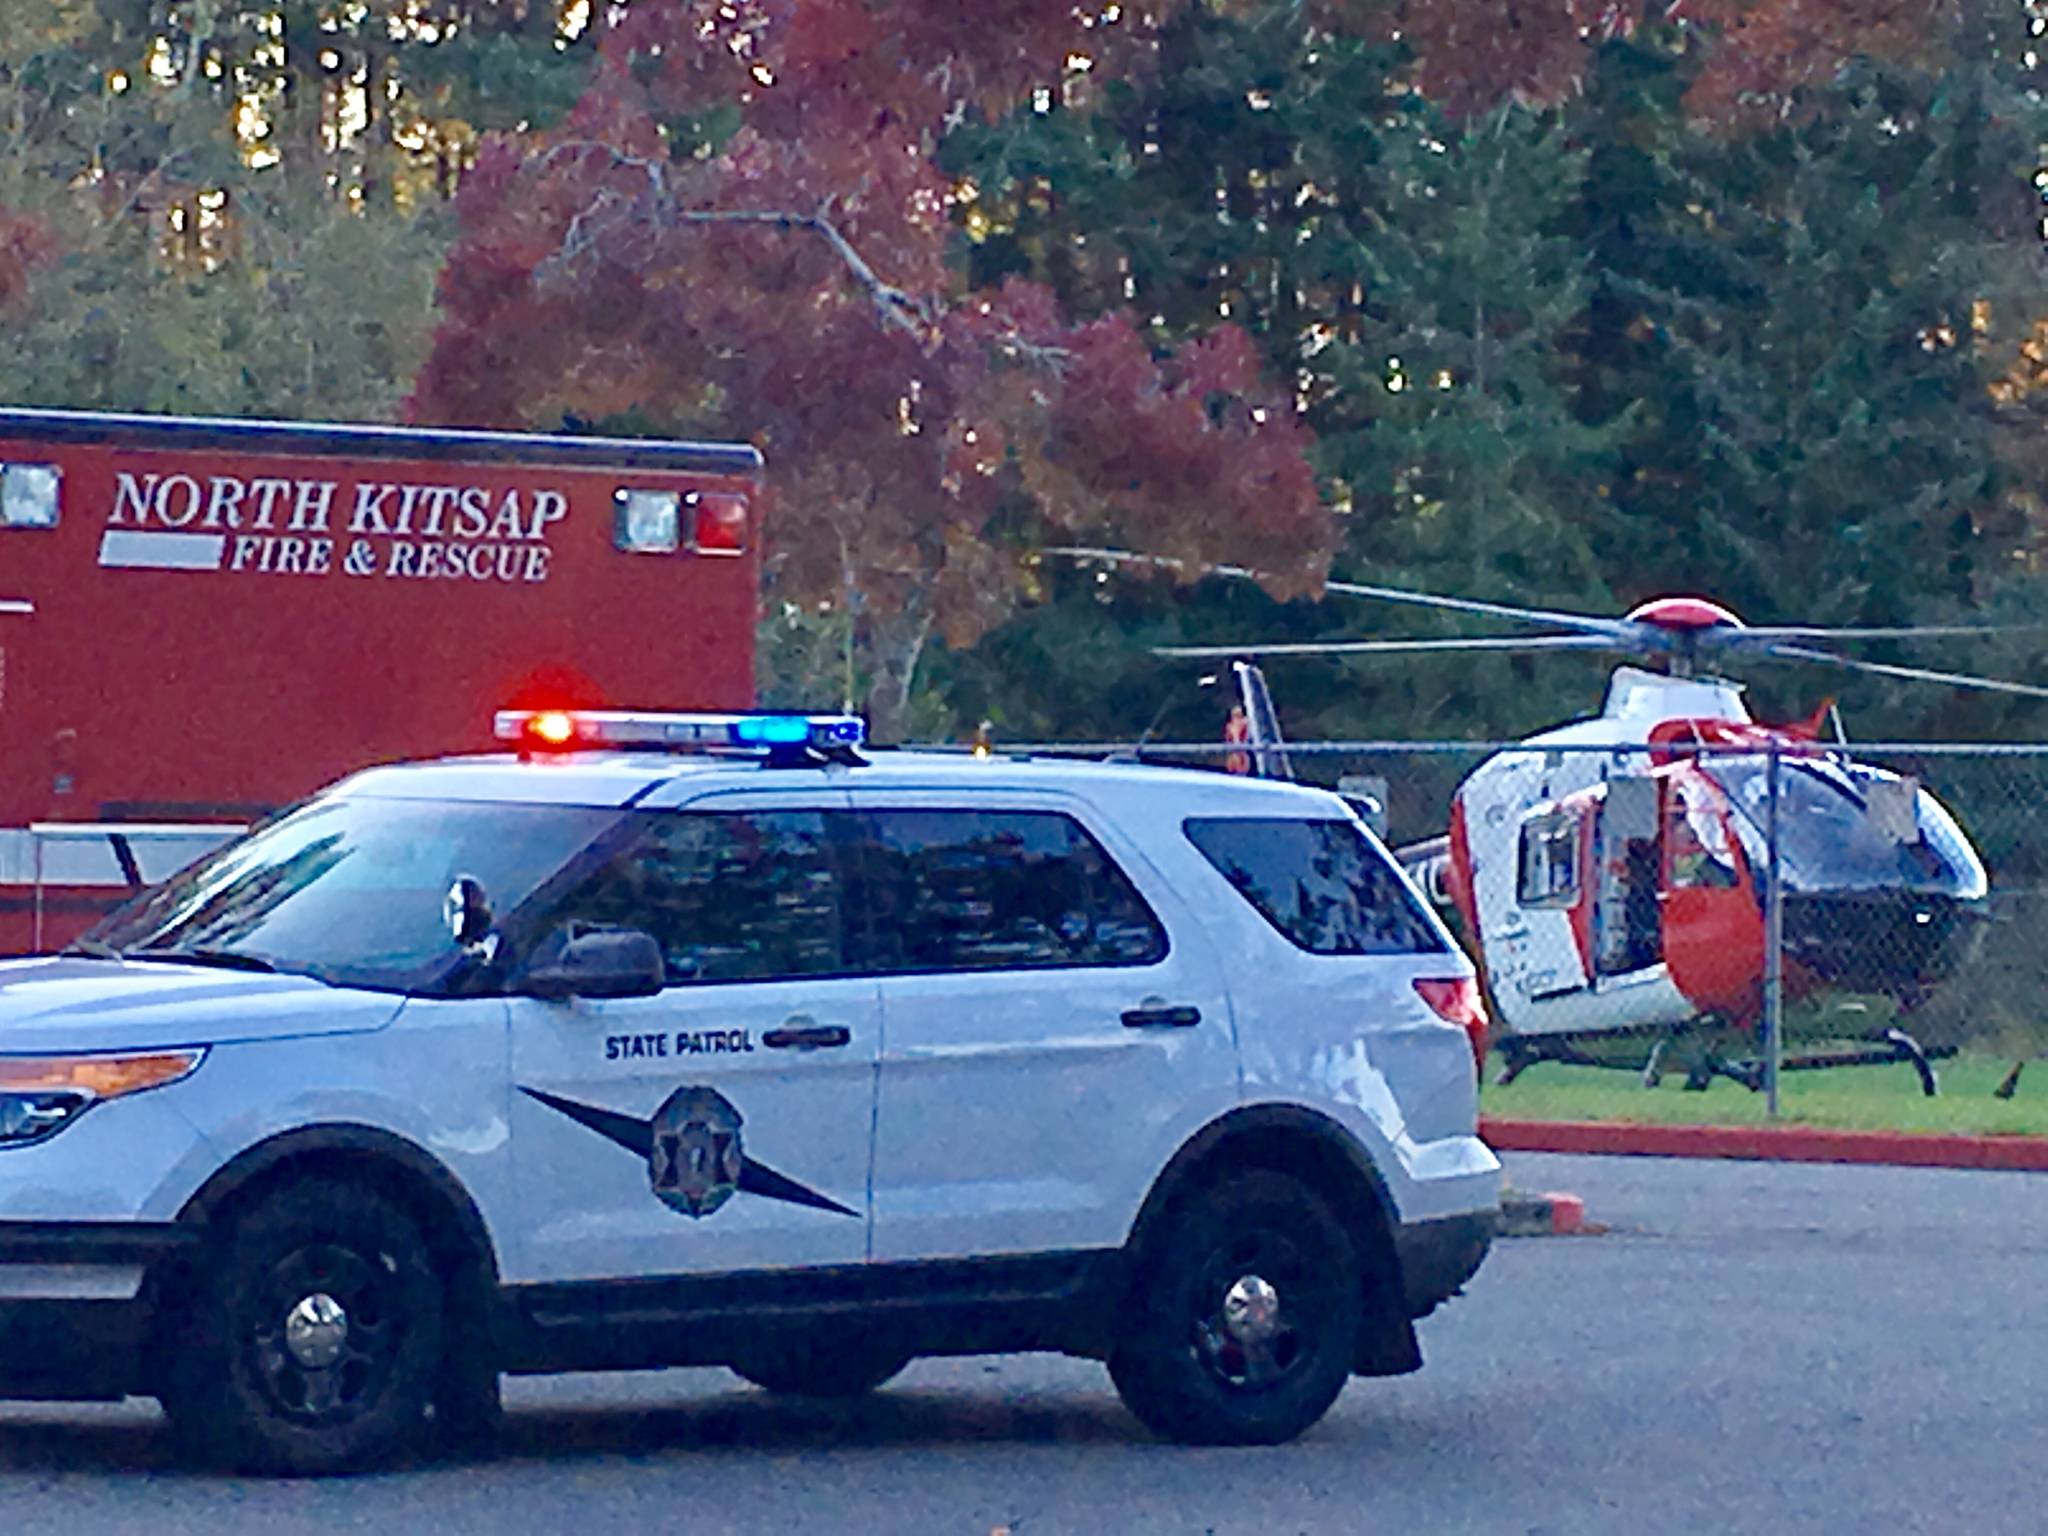 Responders from the Washington State Patrol, North Kitsap Fire & Rescue and Airlift Northwest at David Wolfle Elementary work to transport a motorcyclist to Harborview Medical Center. Photo Courtesy Holly Lawrence.